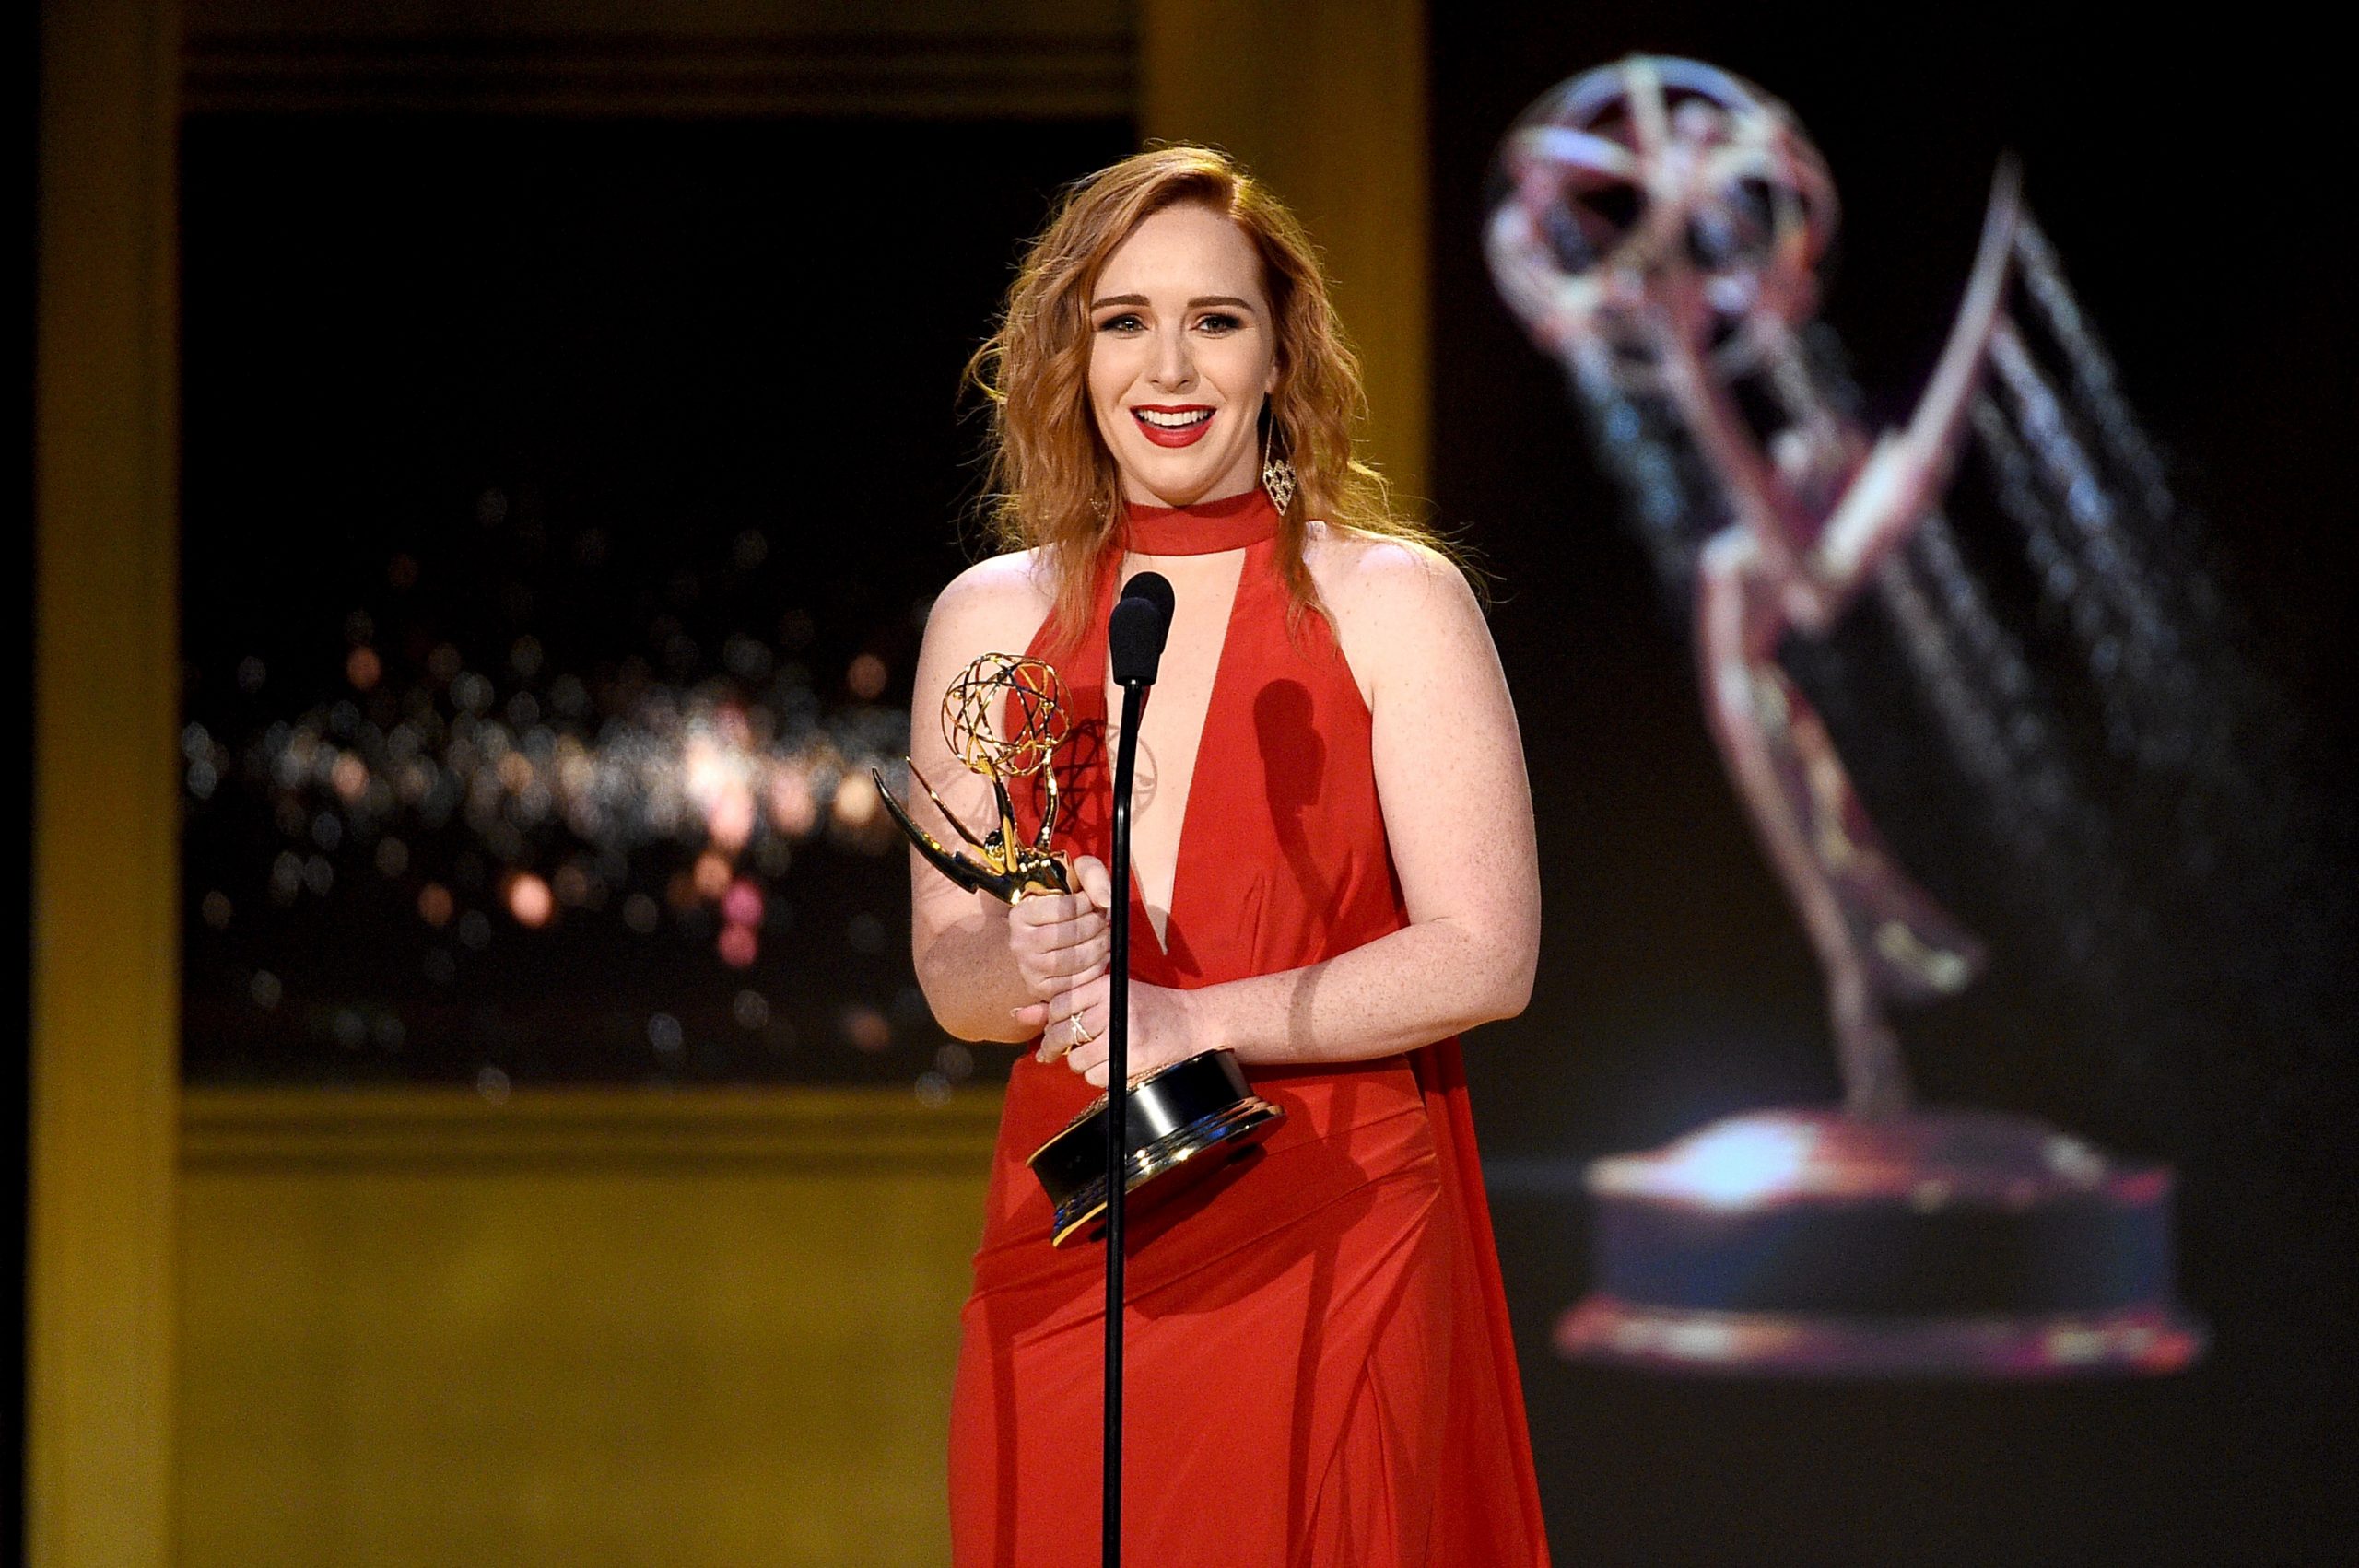 ‘The Young and the Restless’: Fans Praise Camryn Grimes for Her Recent Performance